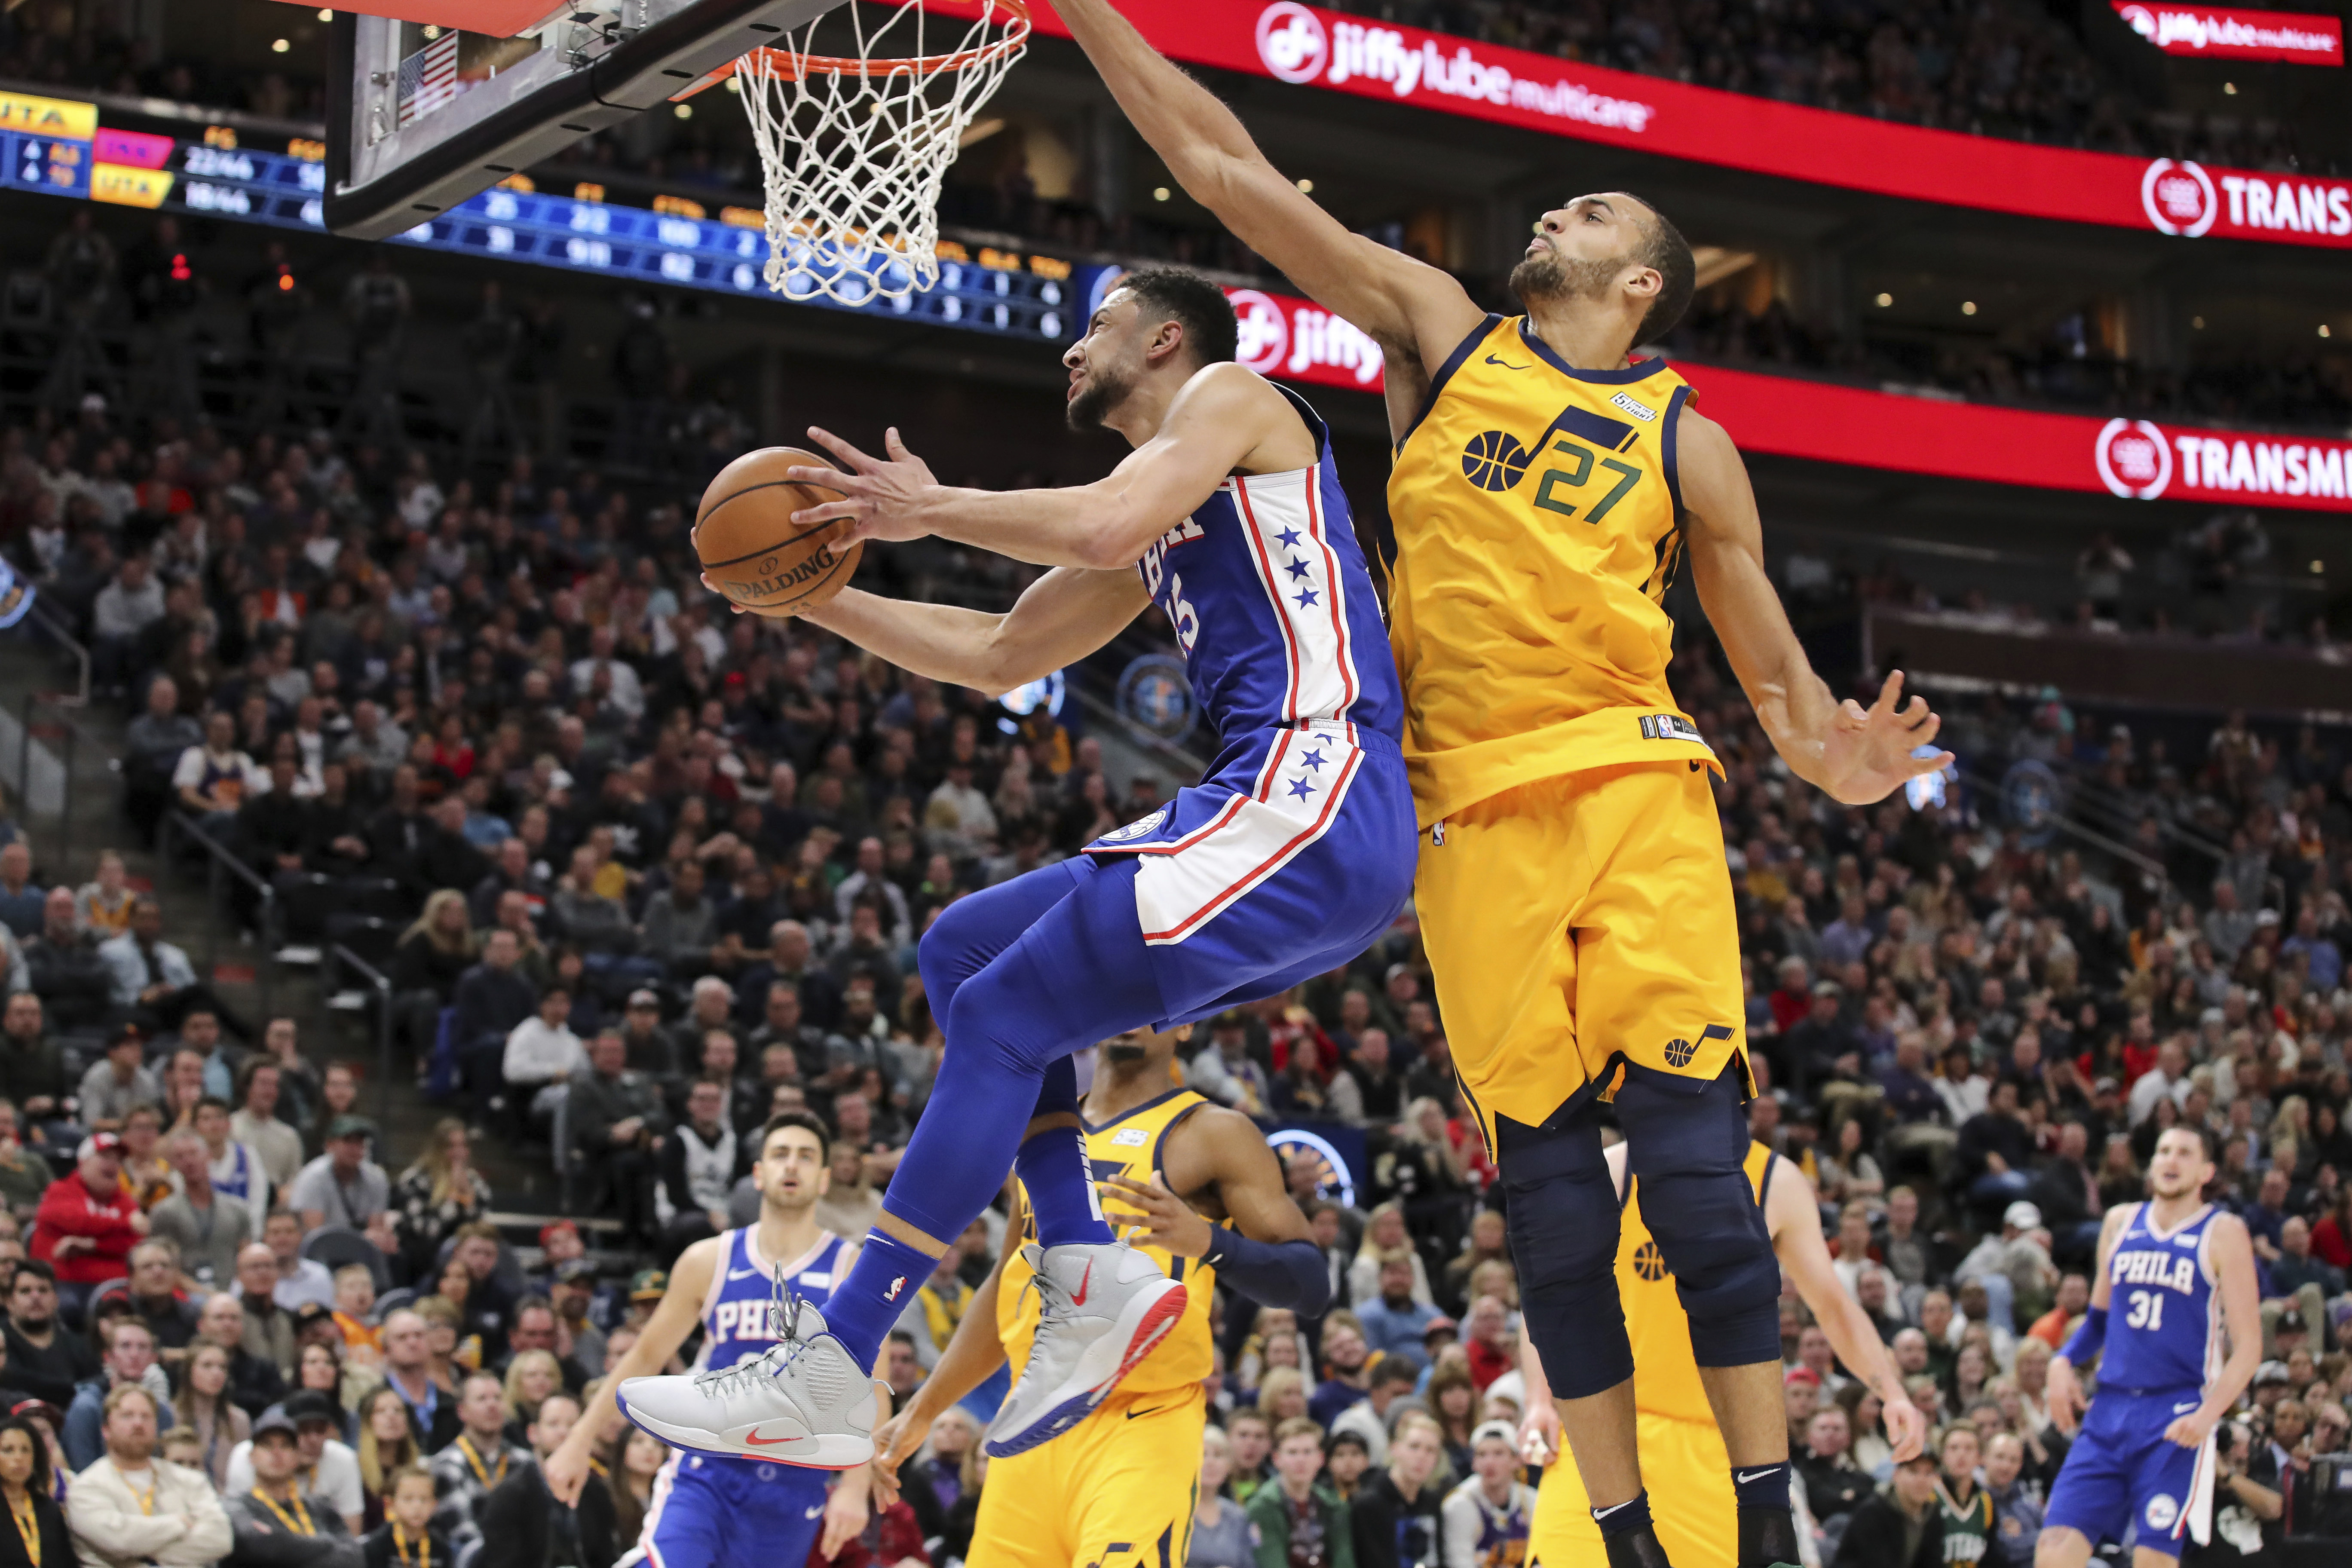 How Philadelphia's Ben Simmons is making such an impact in the NBA